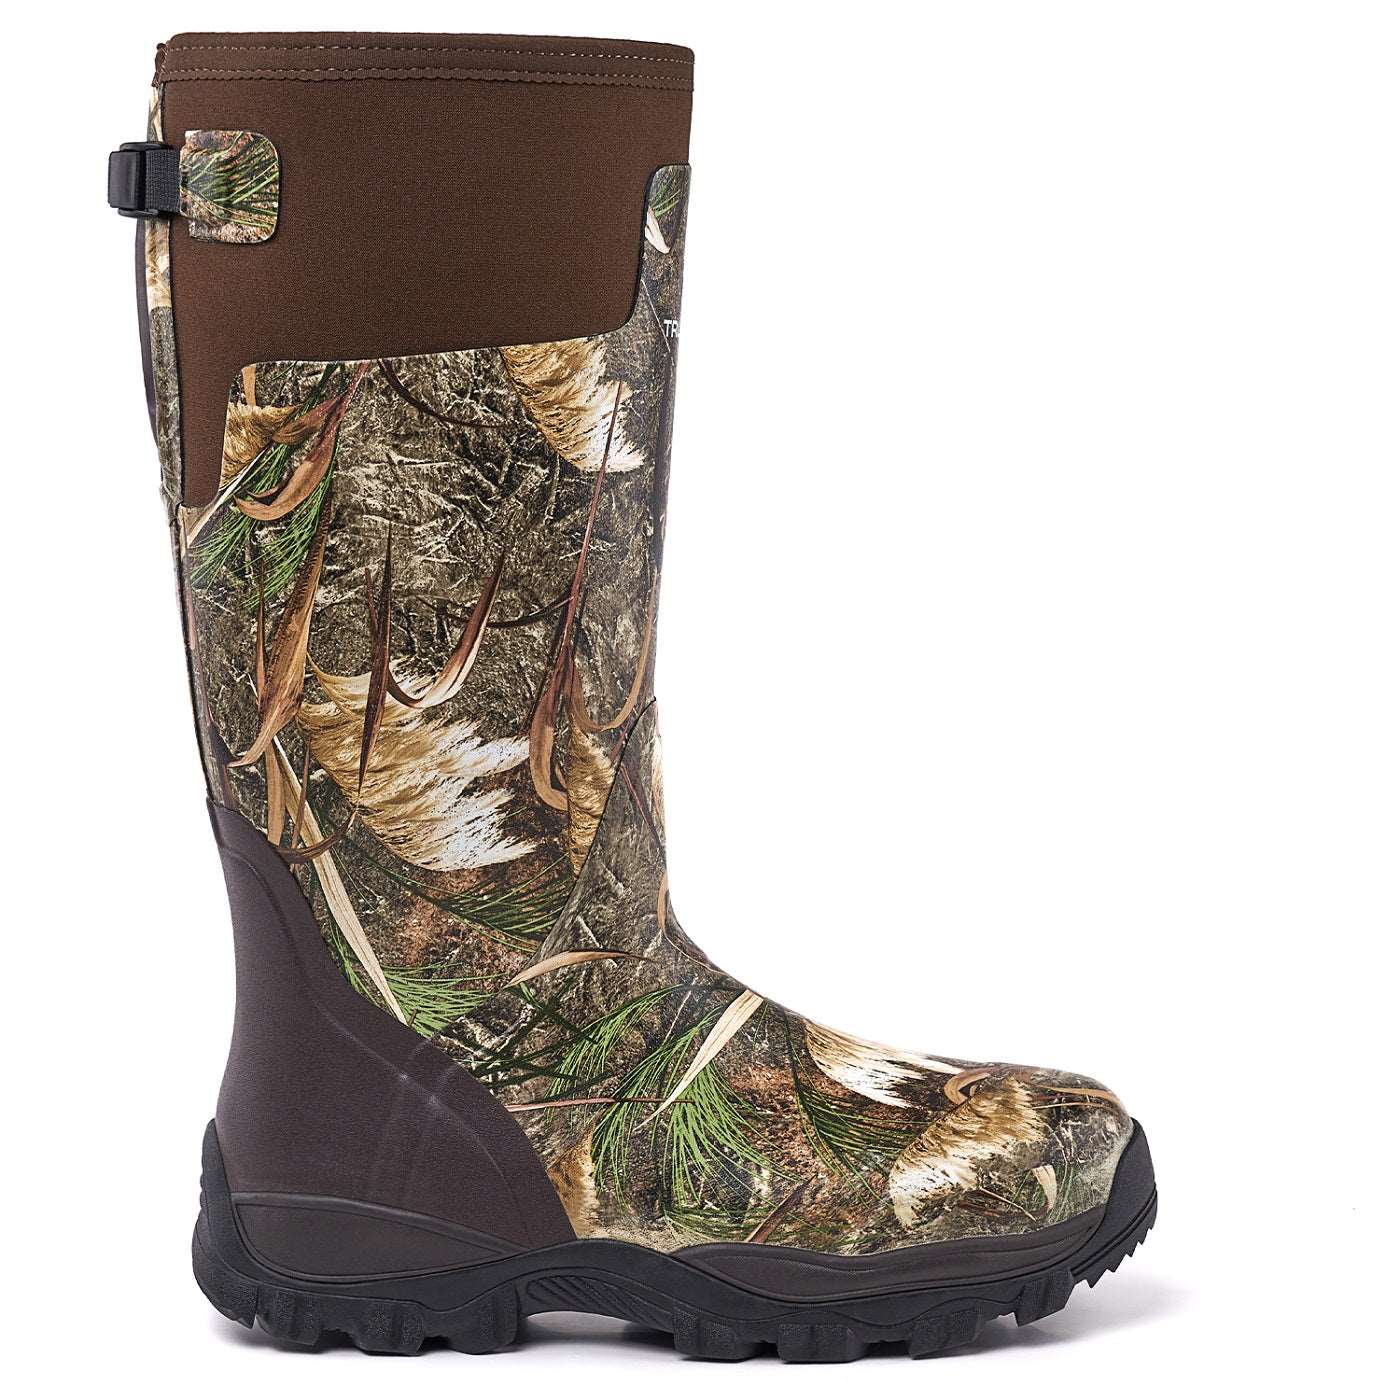 Trudave Real Grass Camo Hunting Boots for Men&Women